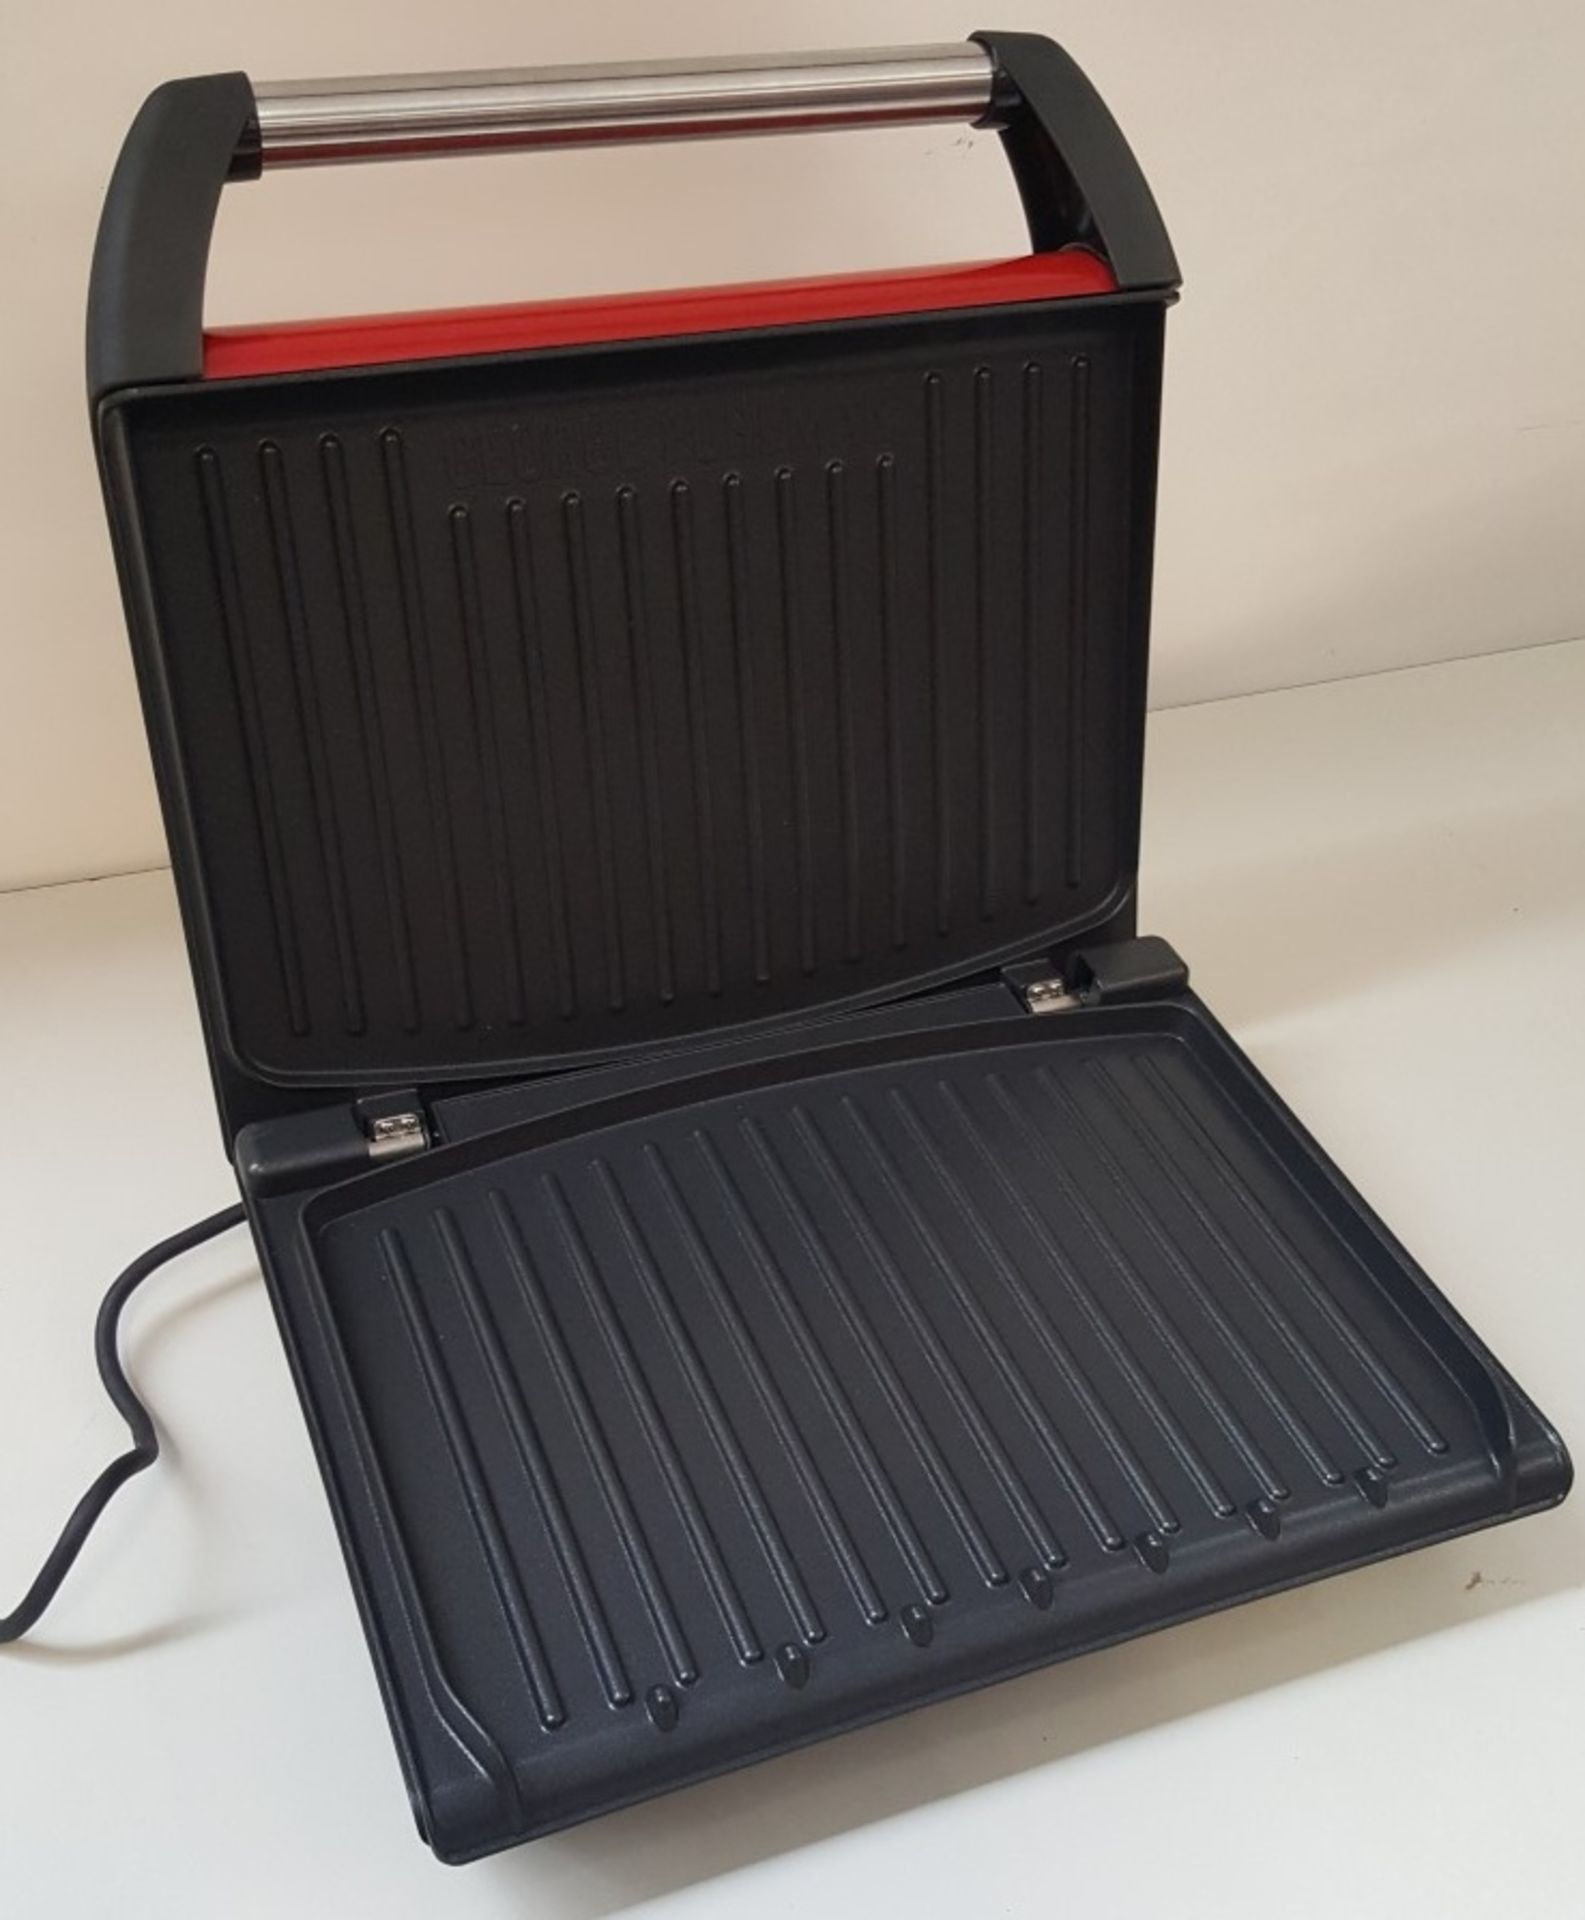 1 x GEORGE FOREMAN 25050 Entertaining Grill - Red - Ref CBU95 - Image 2 of 5